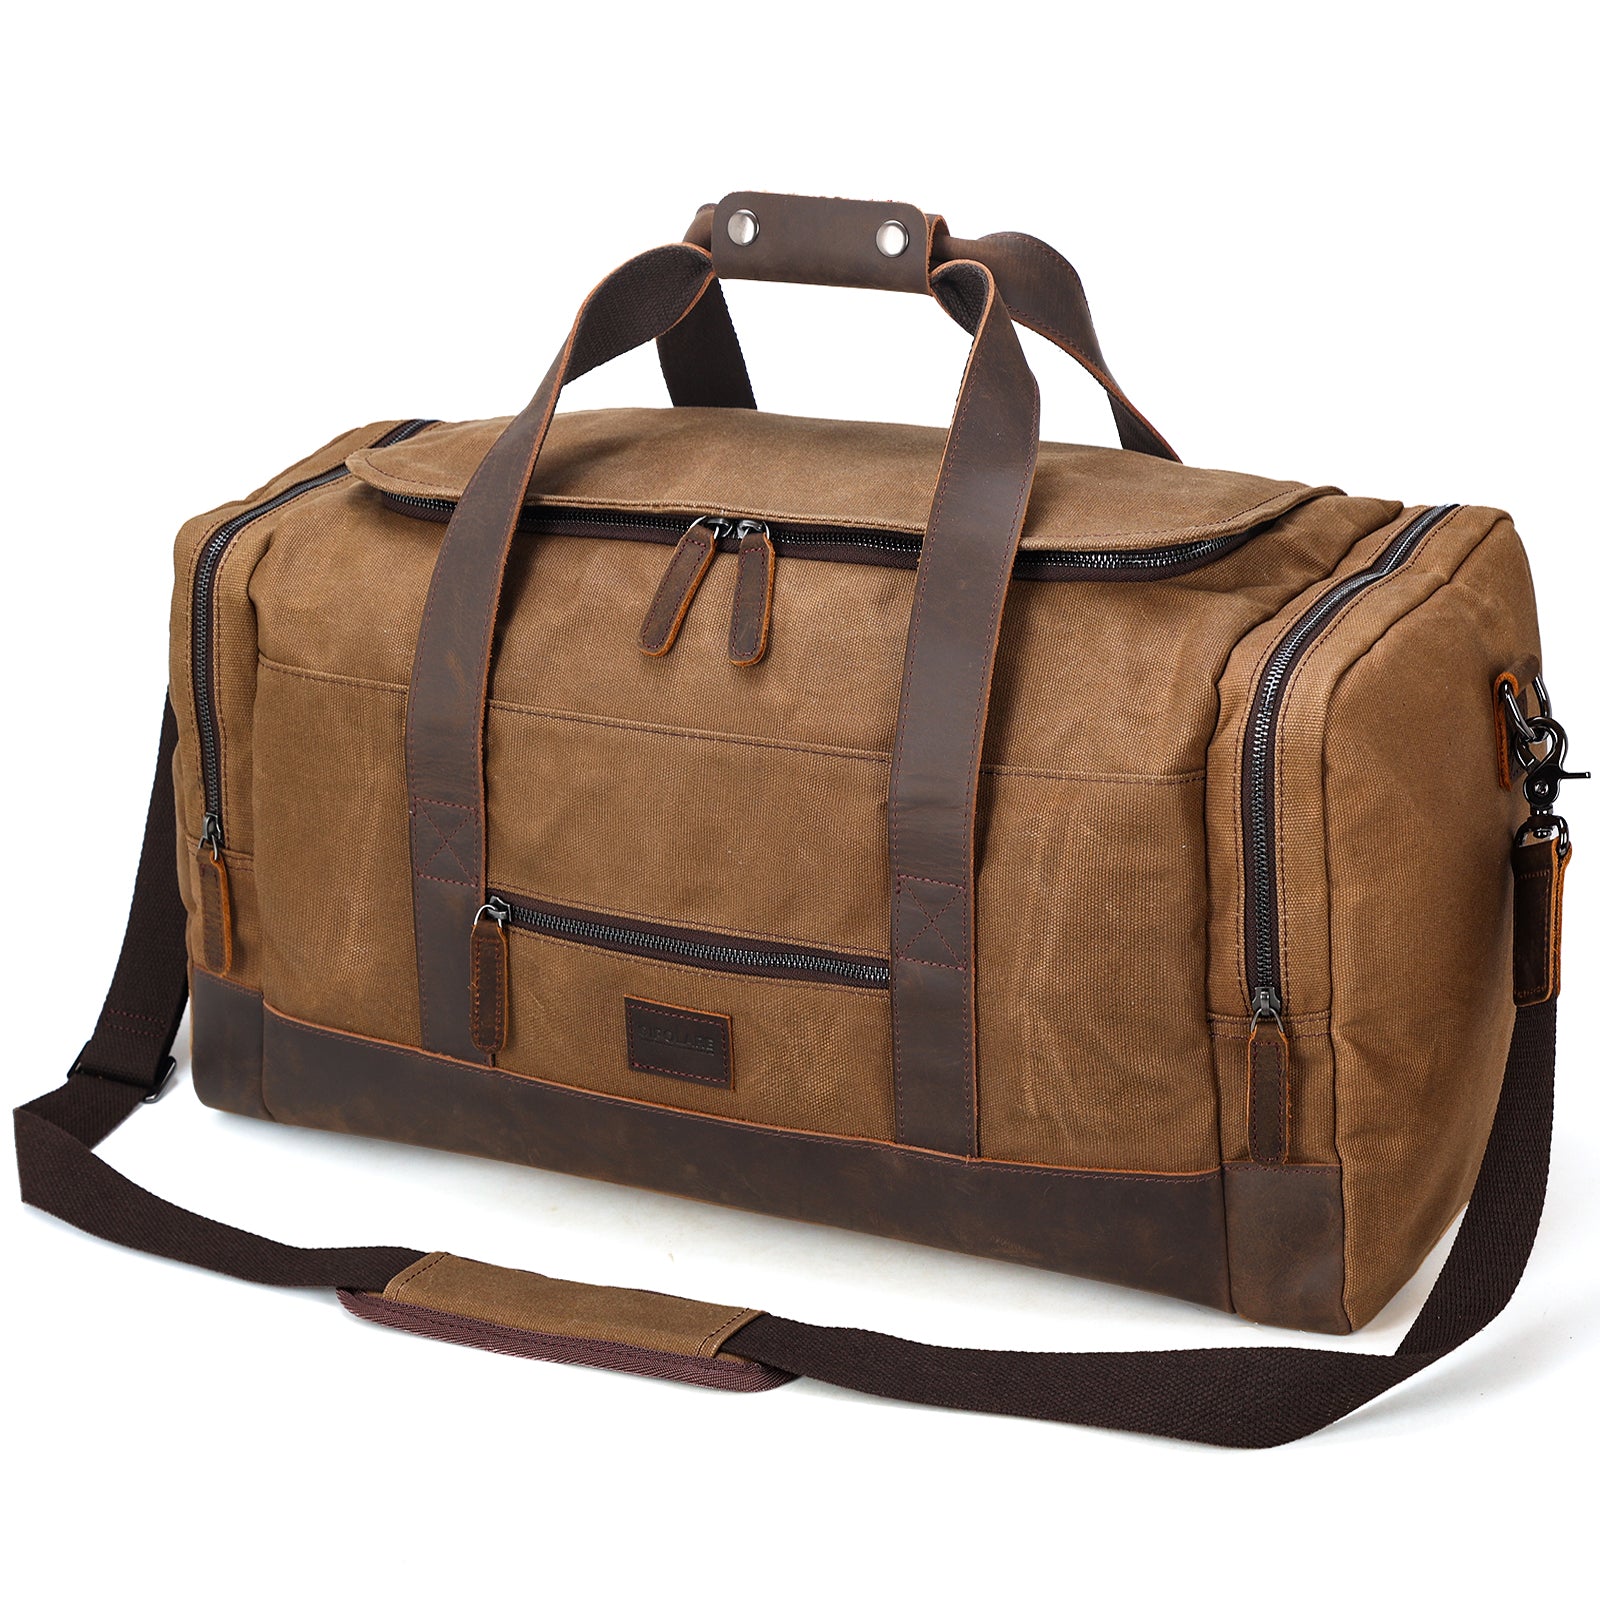 23" Canvas Leather Bag 42L Waterproof Travel Carry on Duffel Bag